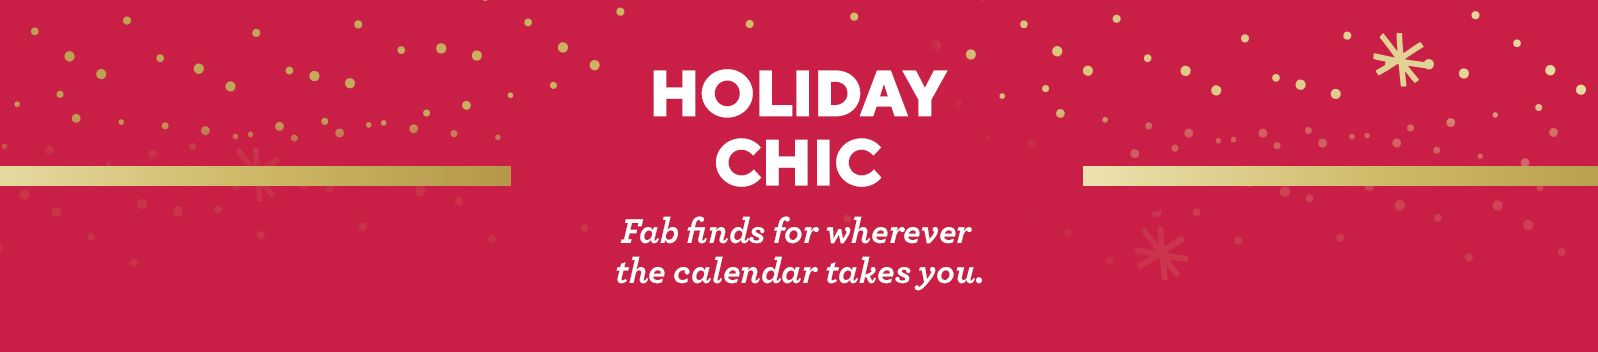 Holiday Chic. Looks Fab finds for wherever the calendar takes you.